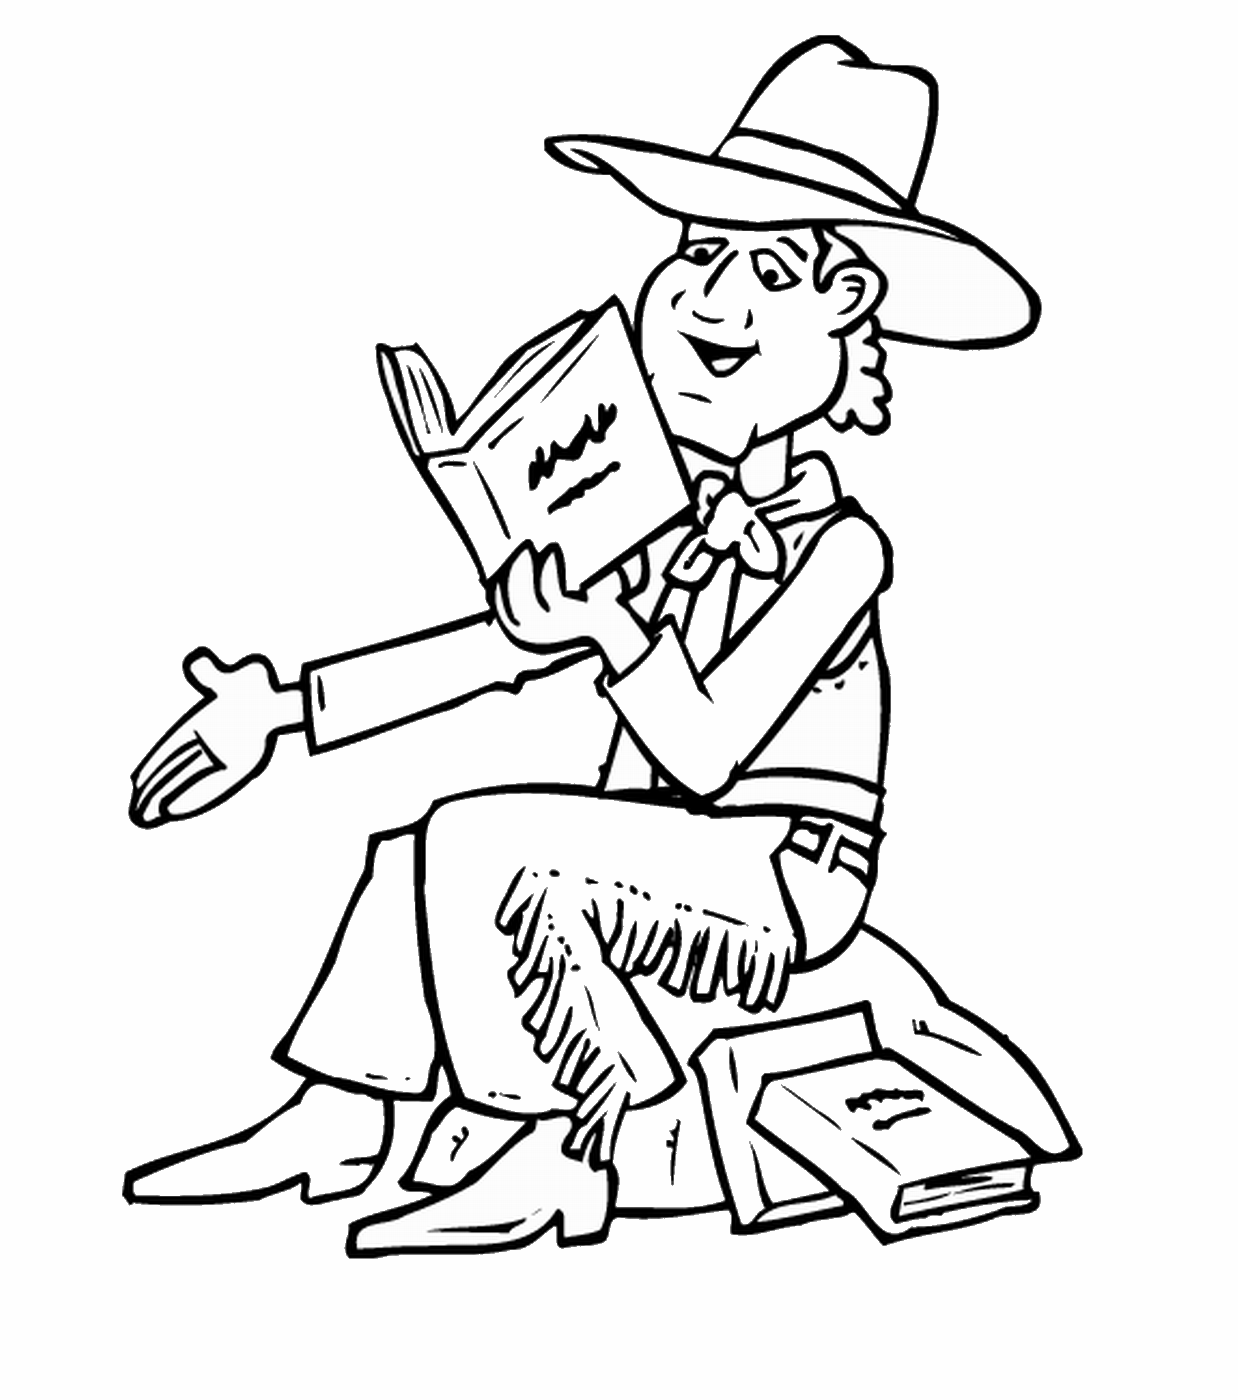 Cowboy Coloring Pages for boys cowboy_15 Printable 2020 0188 Coloring4free